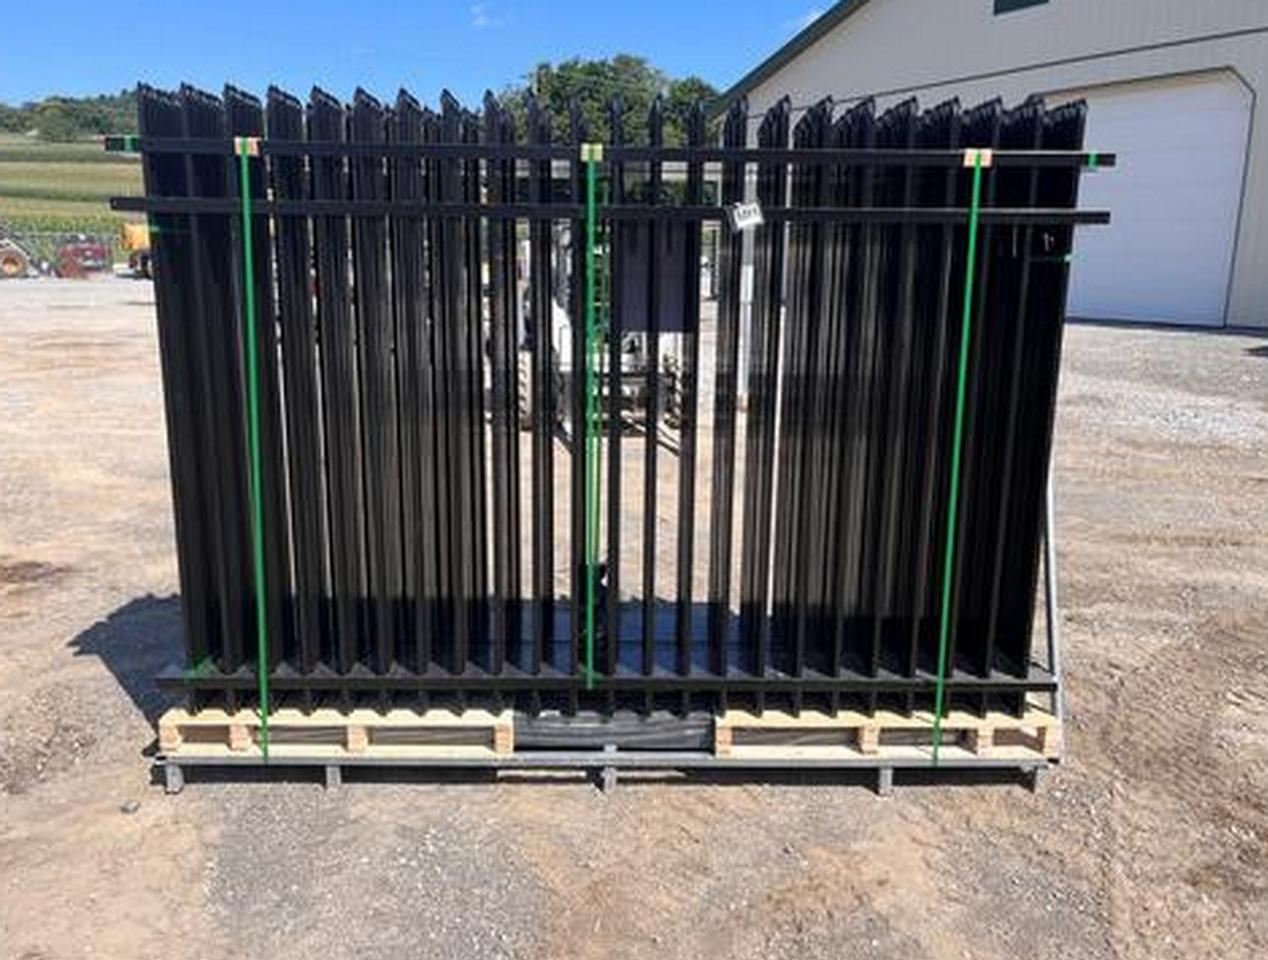 10' x 7' Wrought Iron Site Fence Panels (Qty. 20)